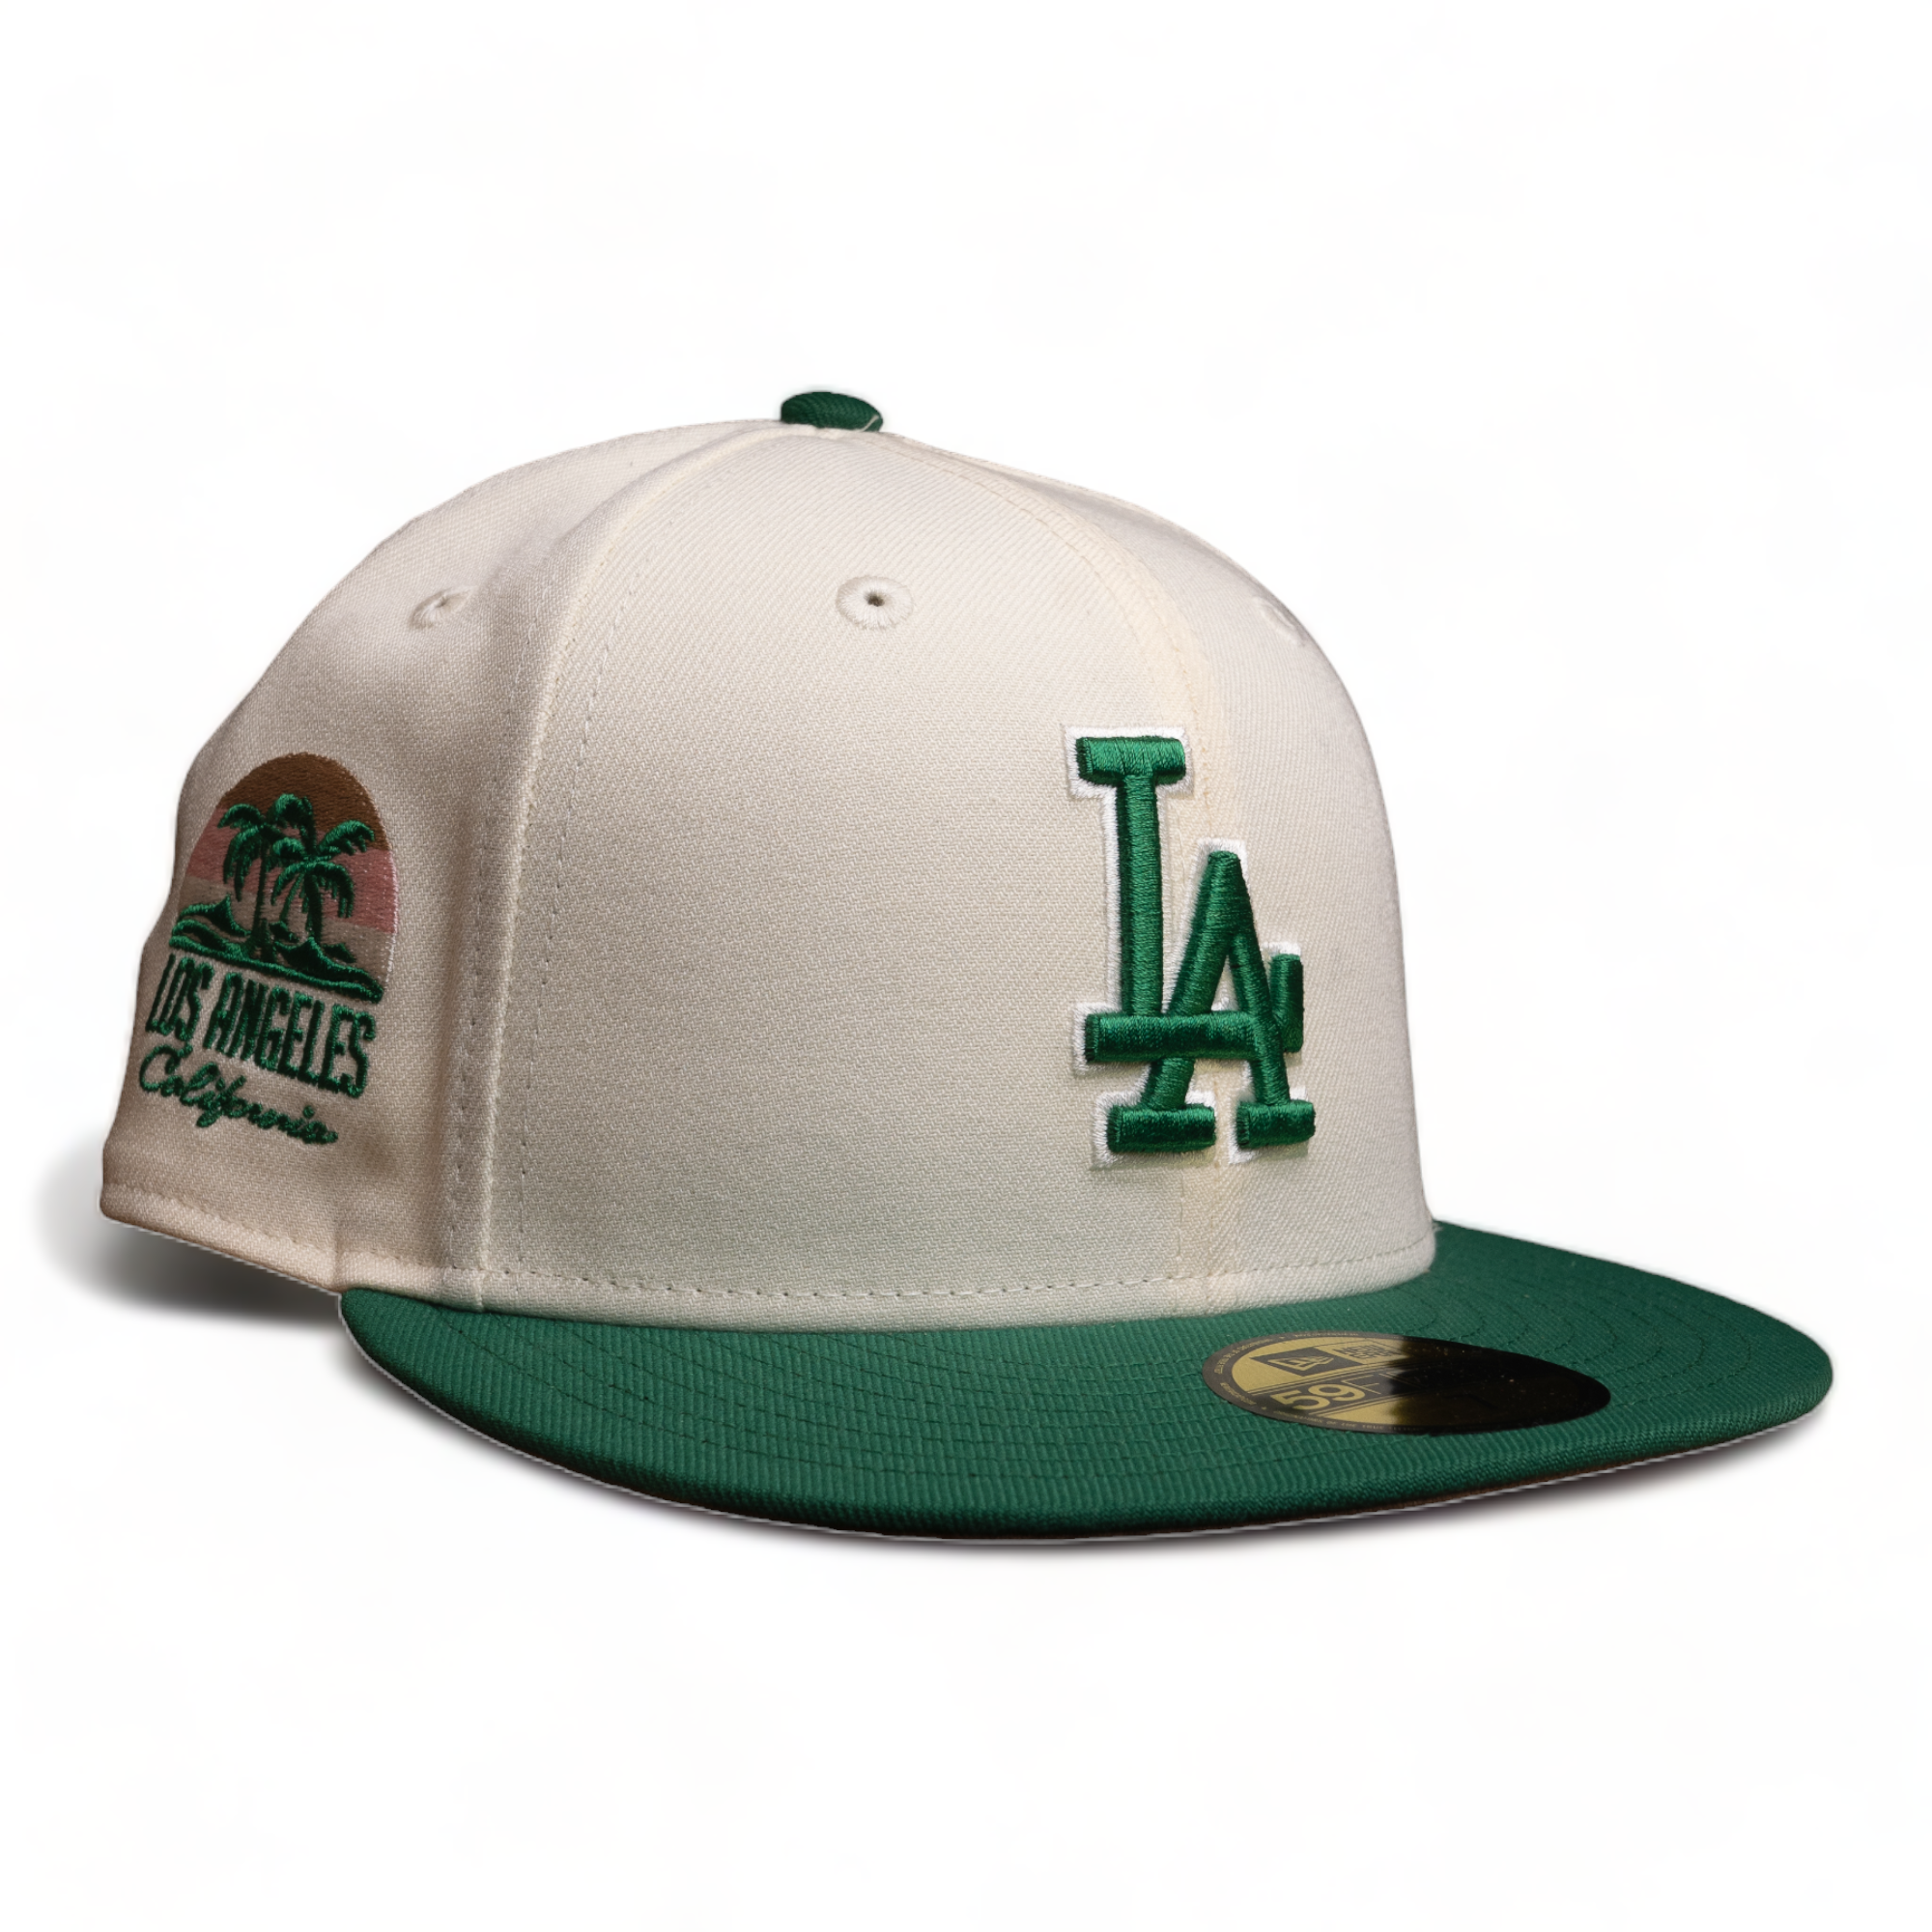 New Era 59Fifty Los Angeles Dodgers Fitted (Anymal Shake Pack Chocolate)